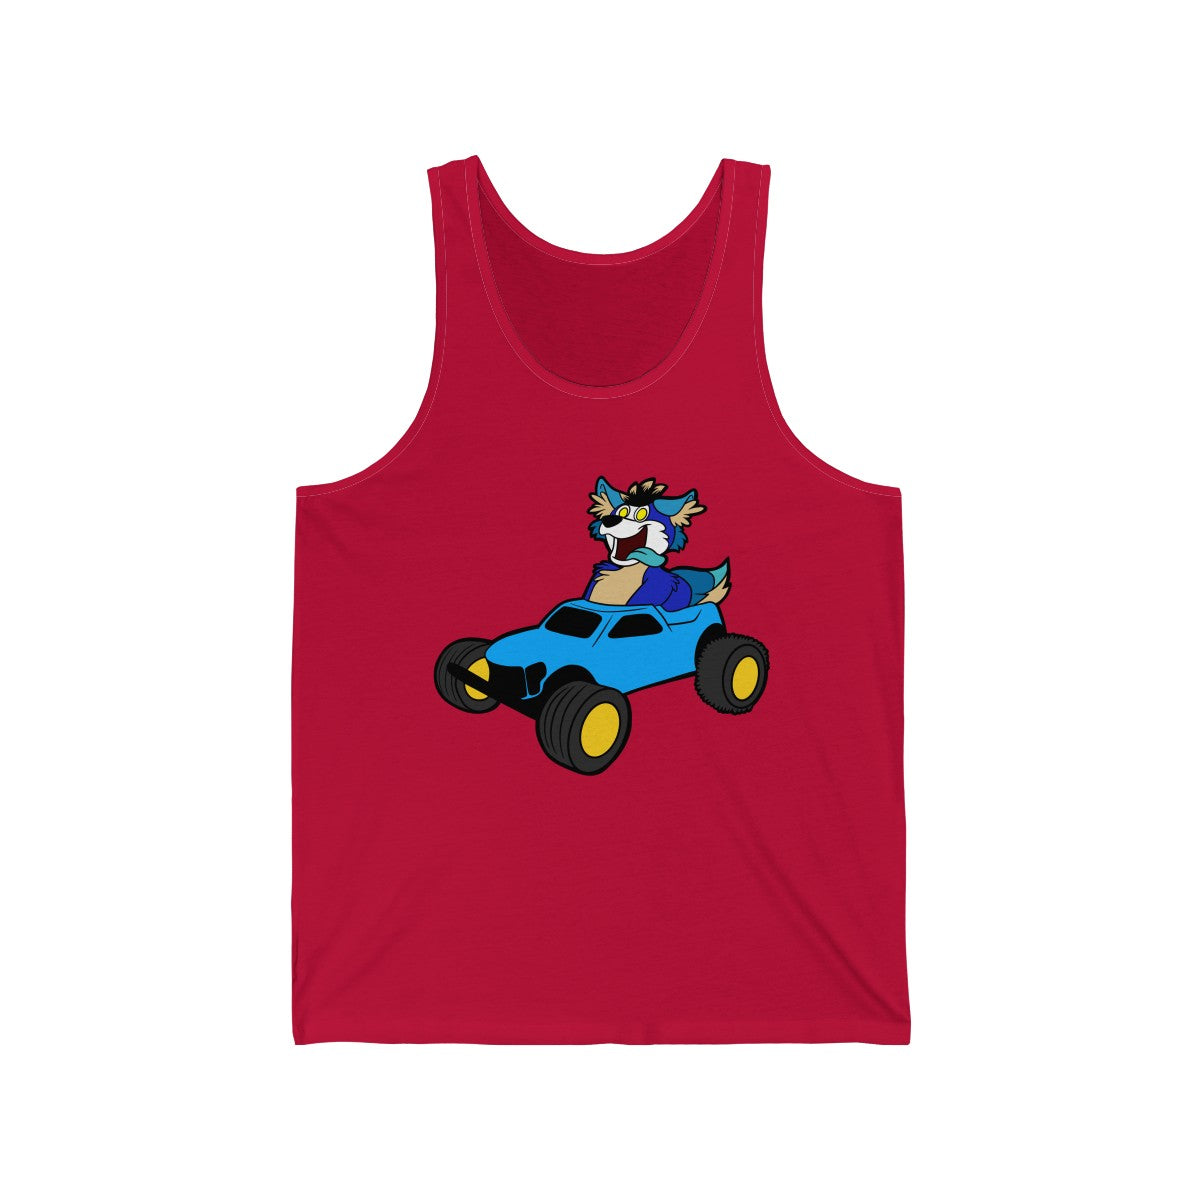 Hund on RC Car - Tank Top Tank Top AFLT-Hund The Hound Red XS 